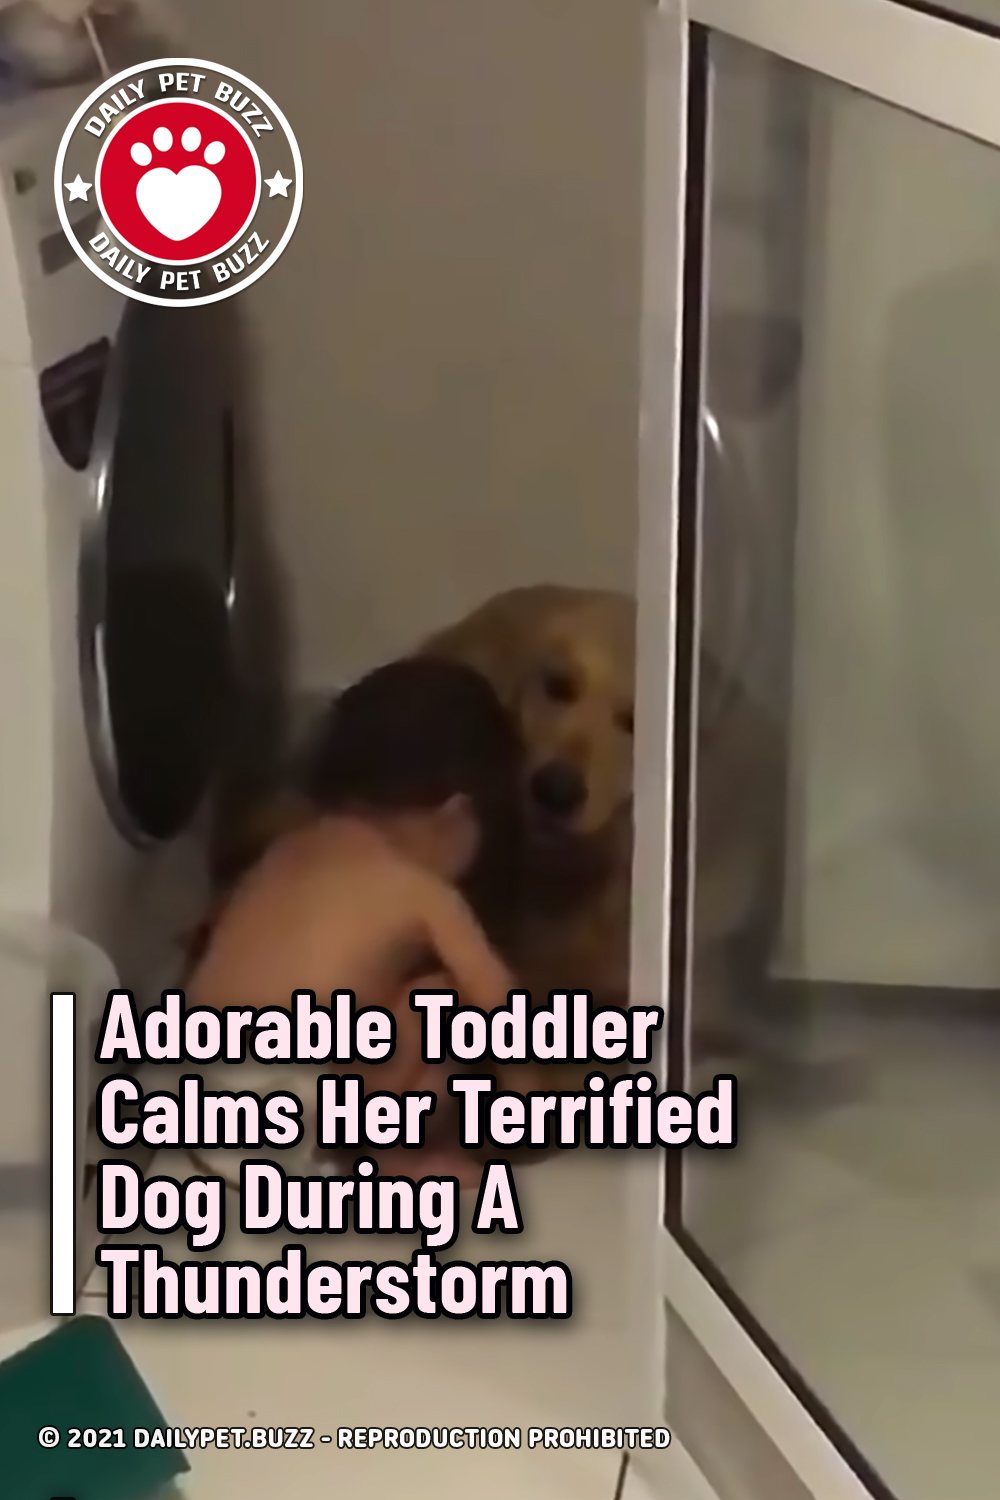 Adorable Toddler Calms Her Terrified Dog During A Thunderstorm